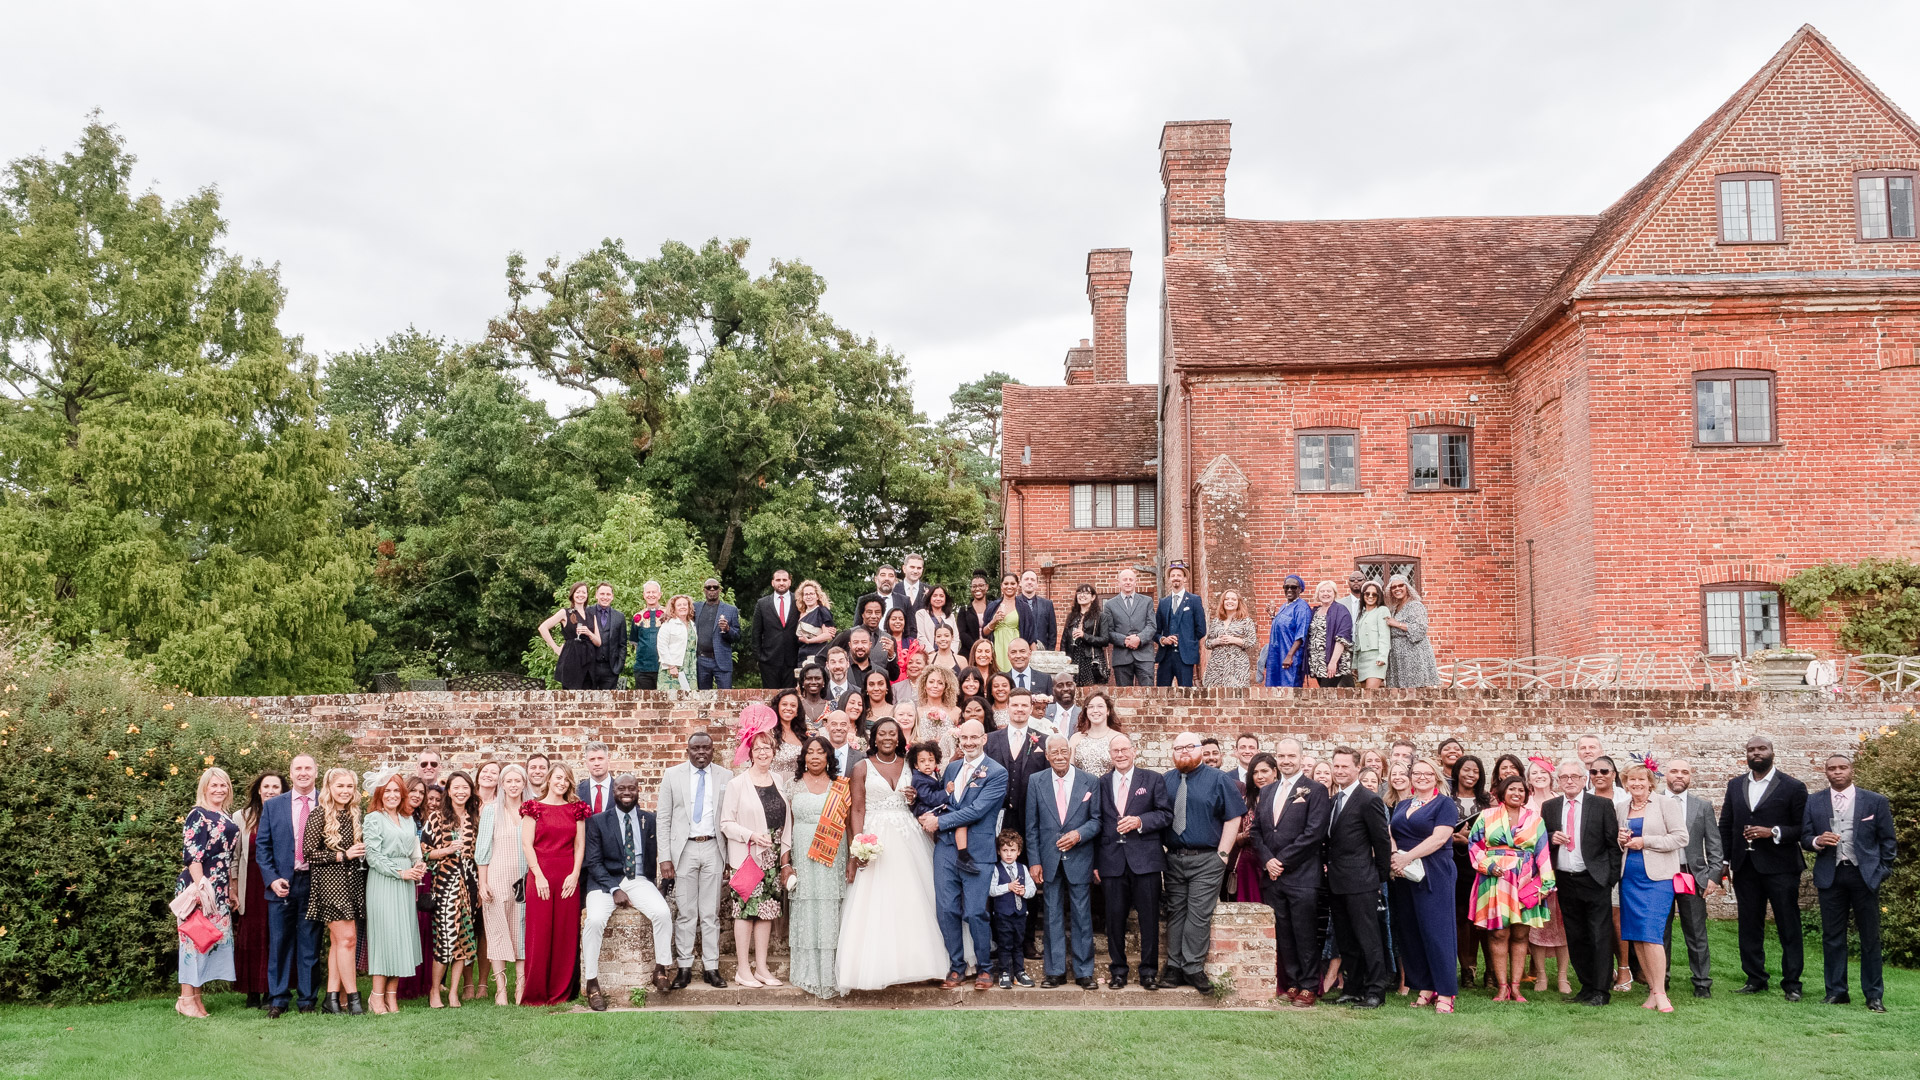 Evelyn and Geoff marry in style at Ufton Court